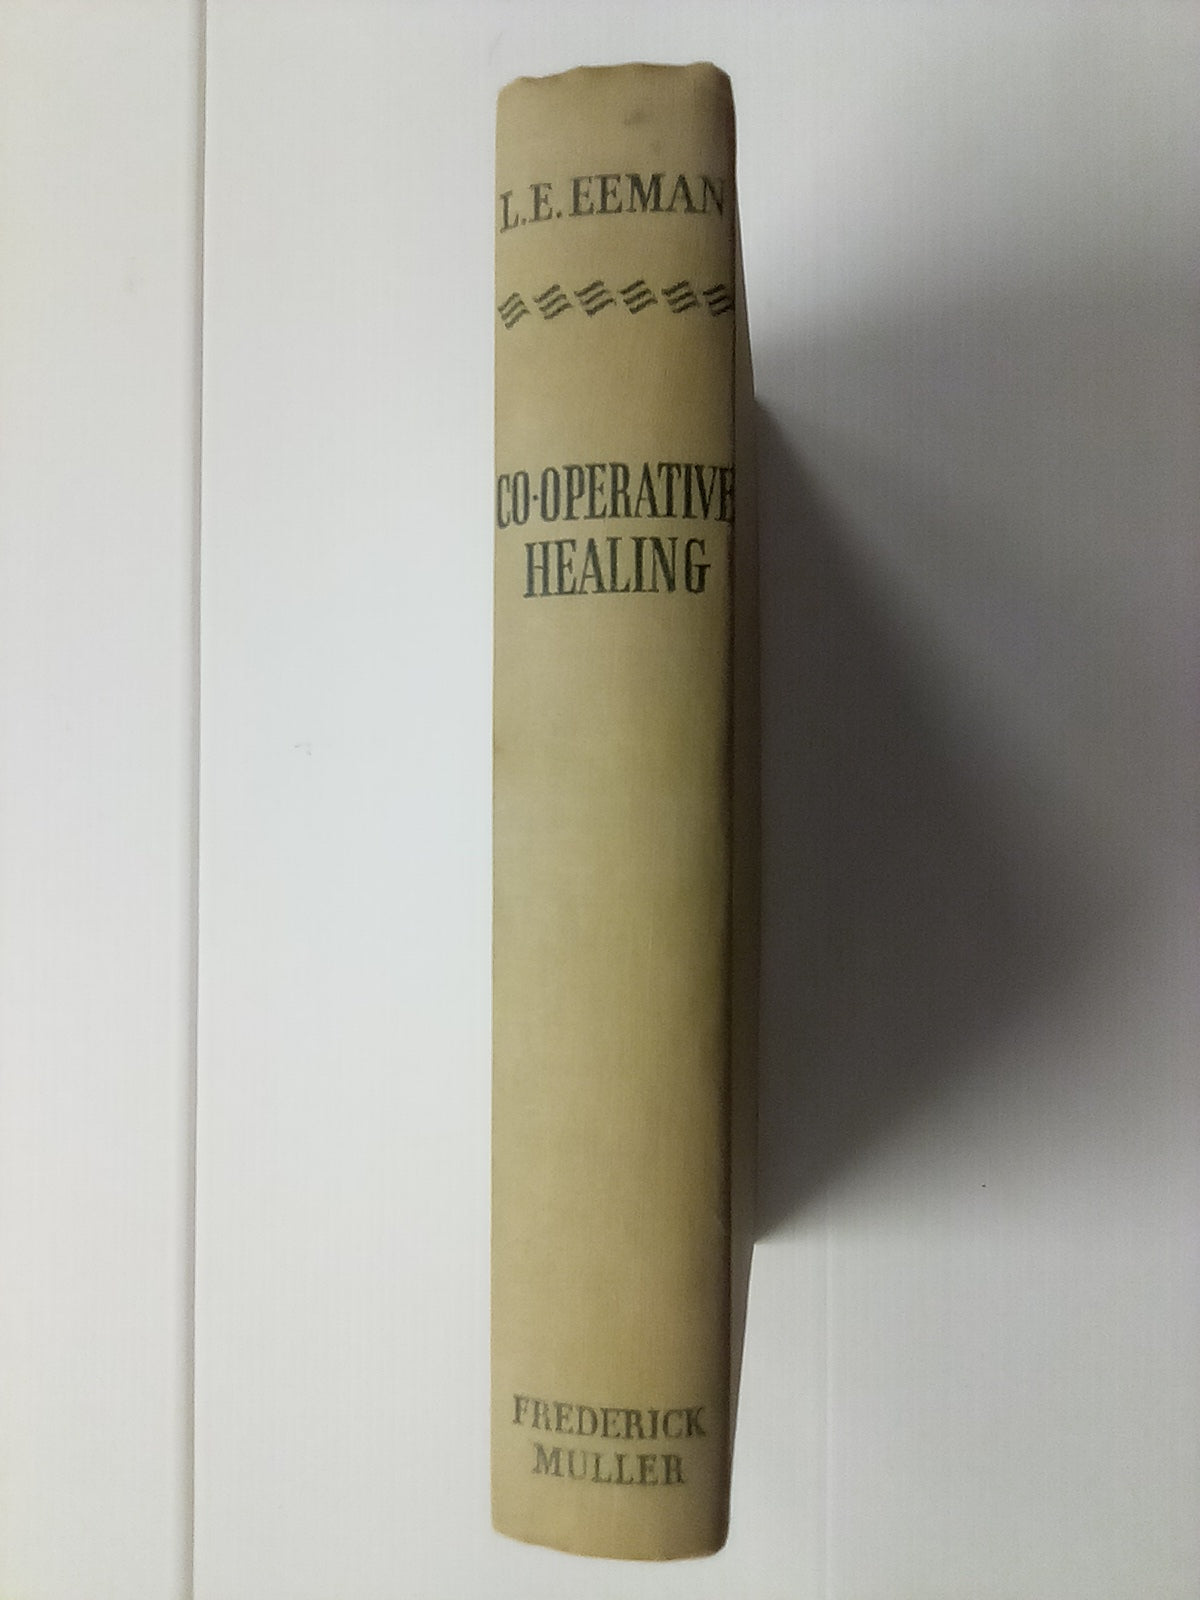 Co-Operative Healing - The Curative properties of Human Radiations (1947) by L.E. Eeman